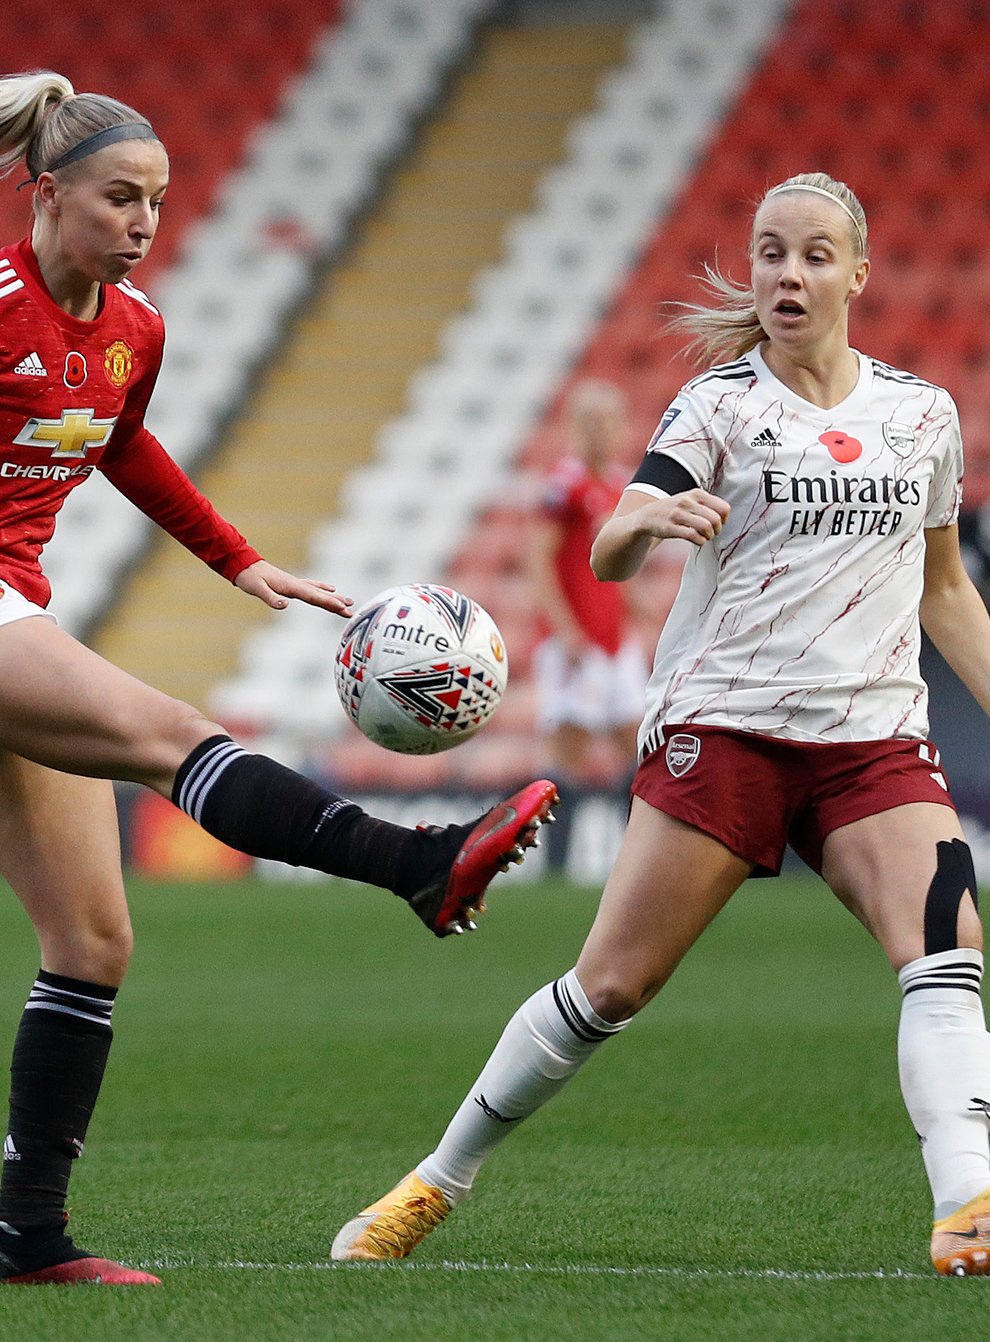 Groenen’s United are top of the WSL currently